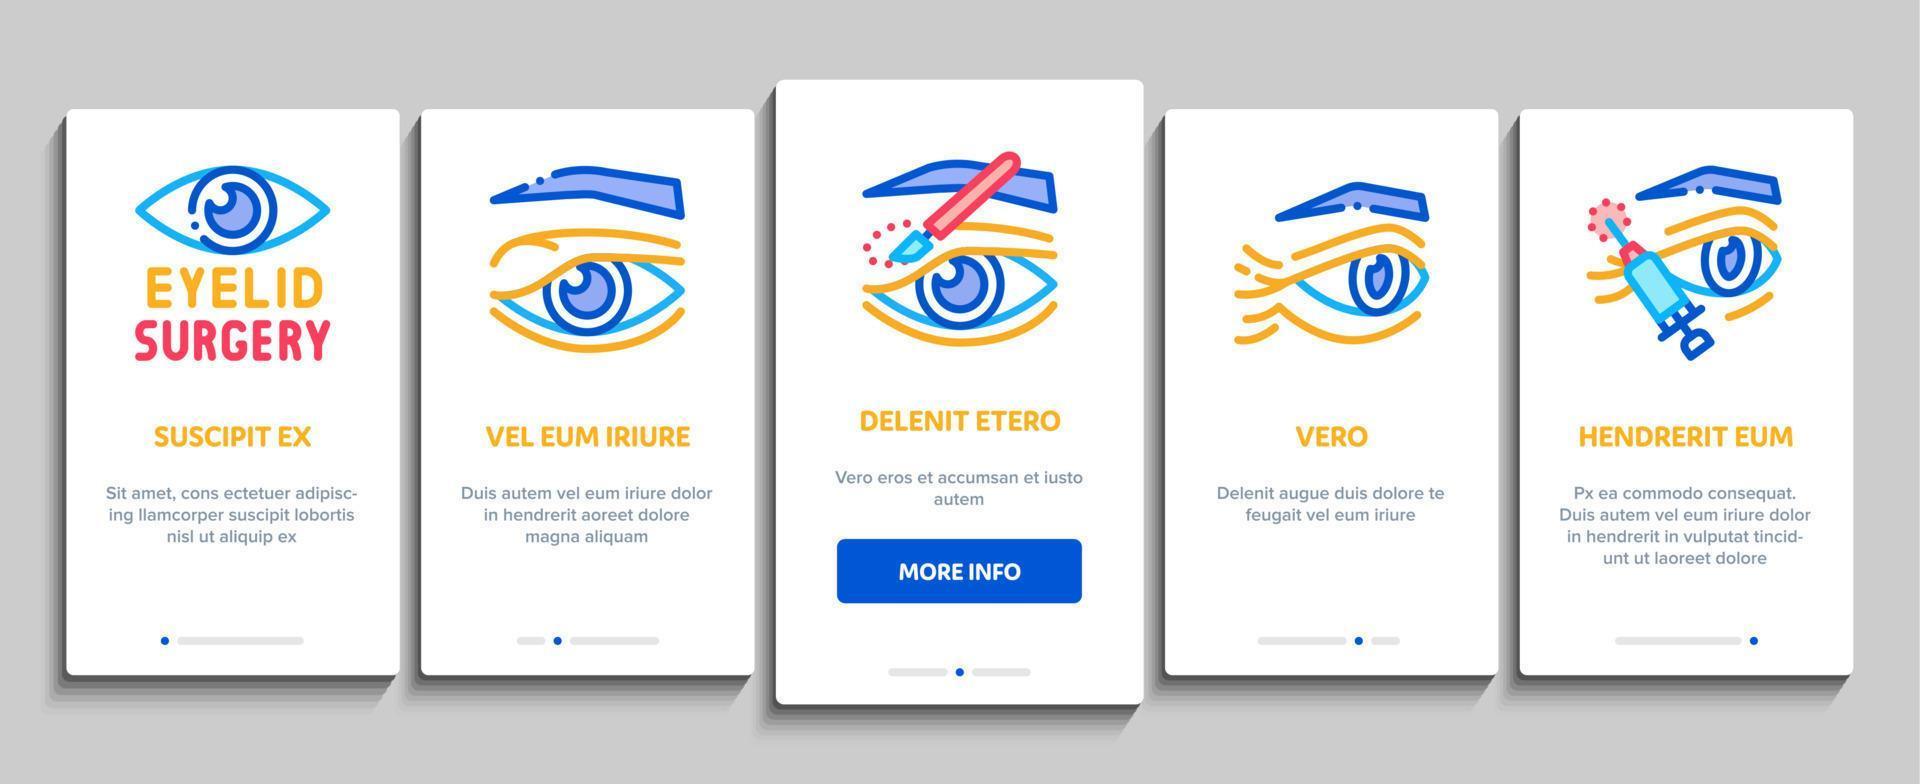 Eyelid Surgery Healthy Onboarding Elements Icons Set Vector